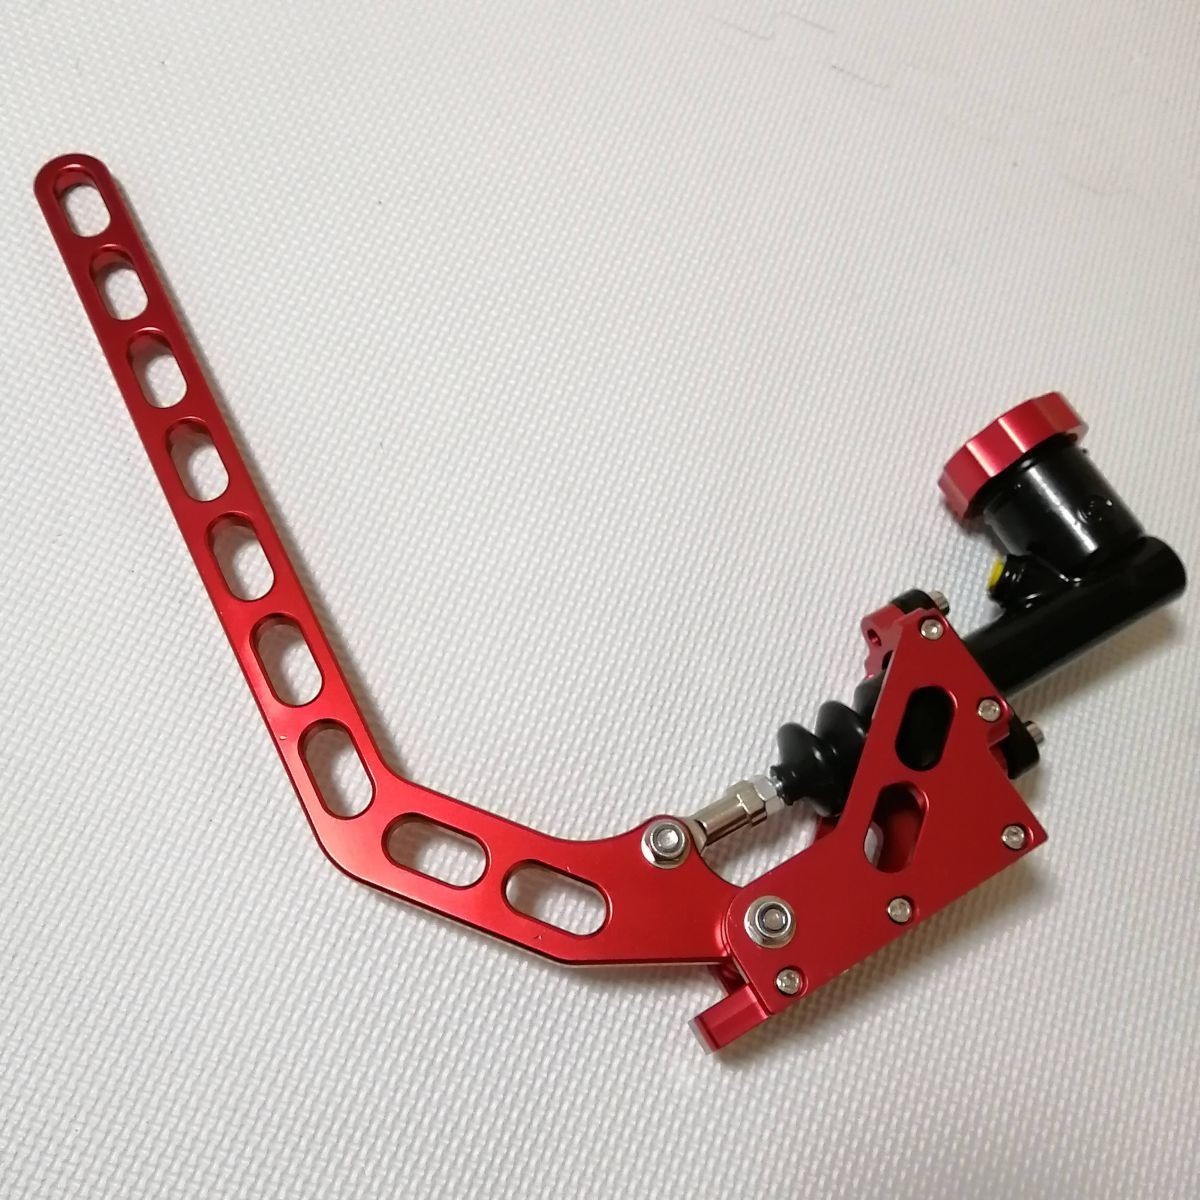  new goods oil pressure side brake lever aluminium shaving (formation process during milling) red all check settled * JZX100 180SX S14 S15 FD3S AE86 gymkhana drift Rally 